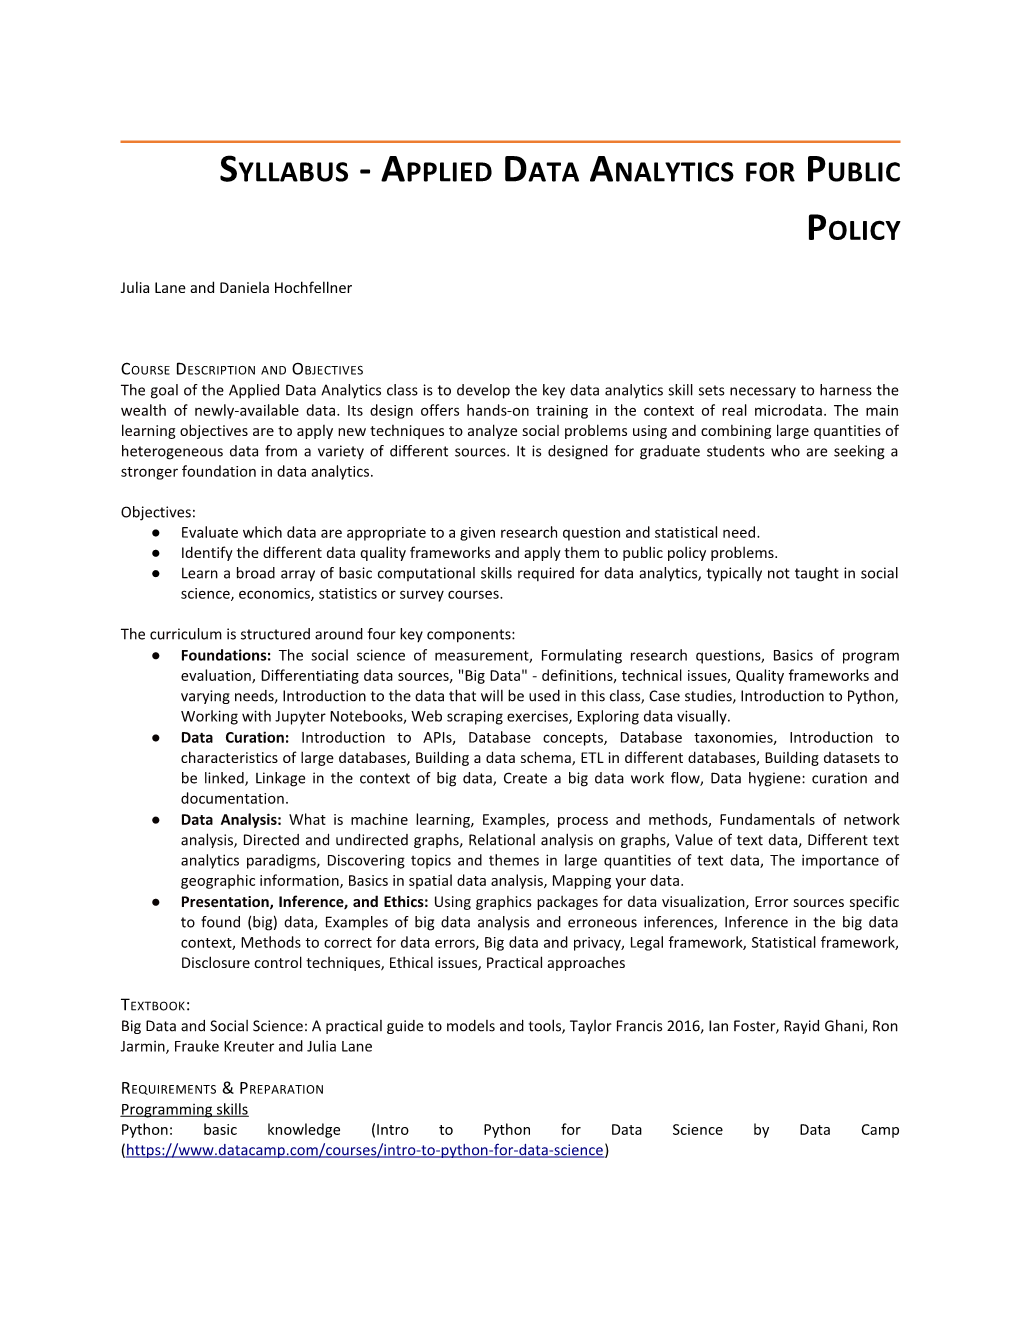 Syllabus - Applied Data Analytics for Public Policy